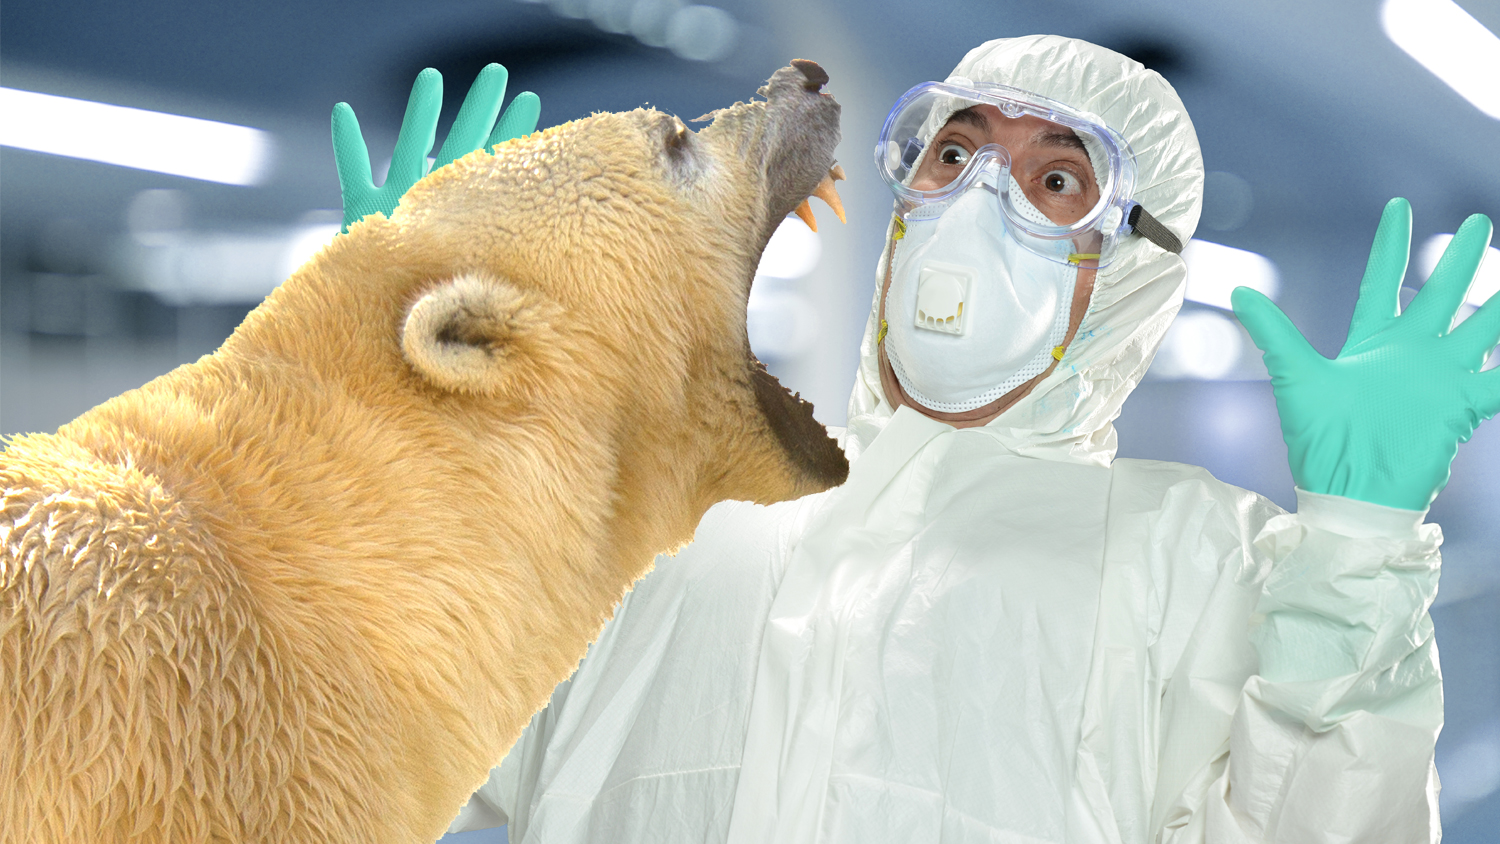 Polar bear about to eat a scientist